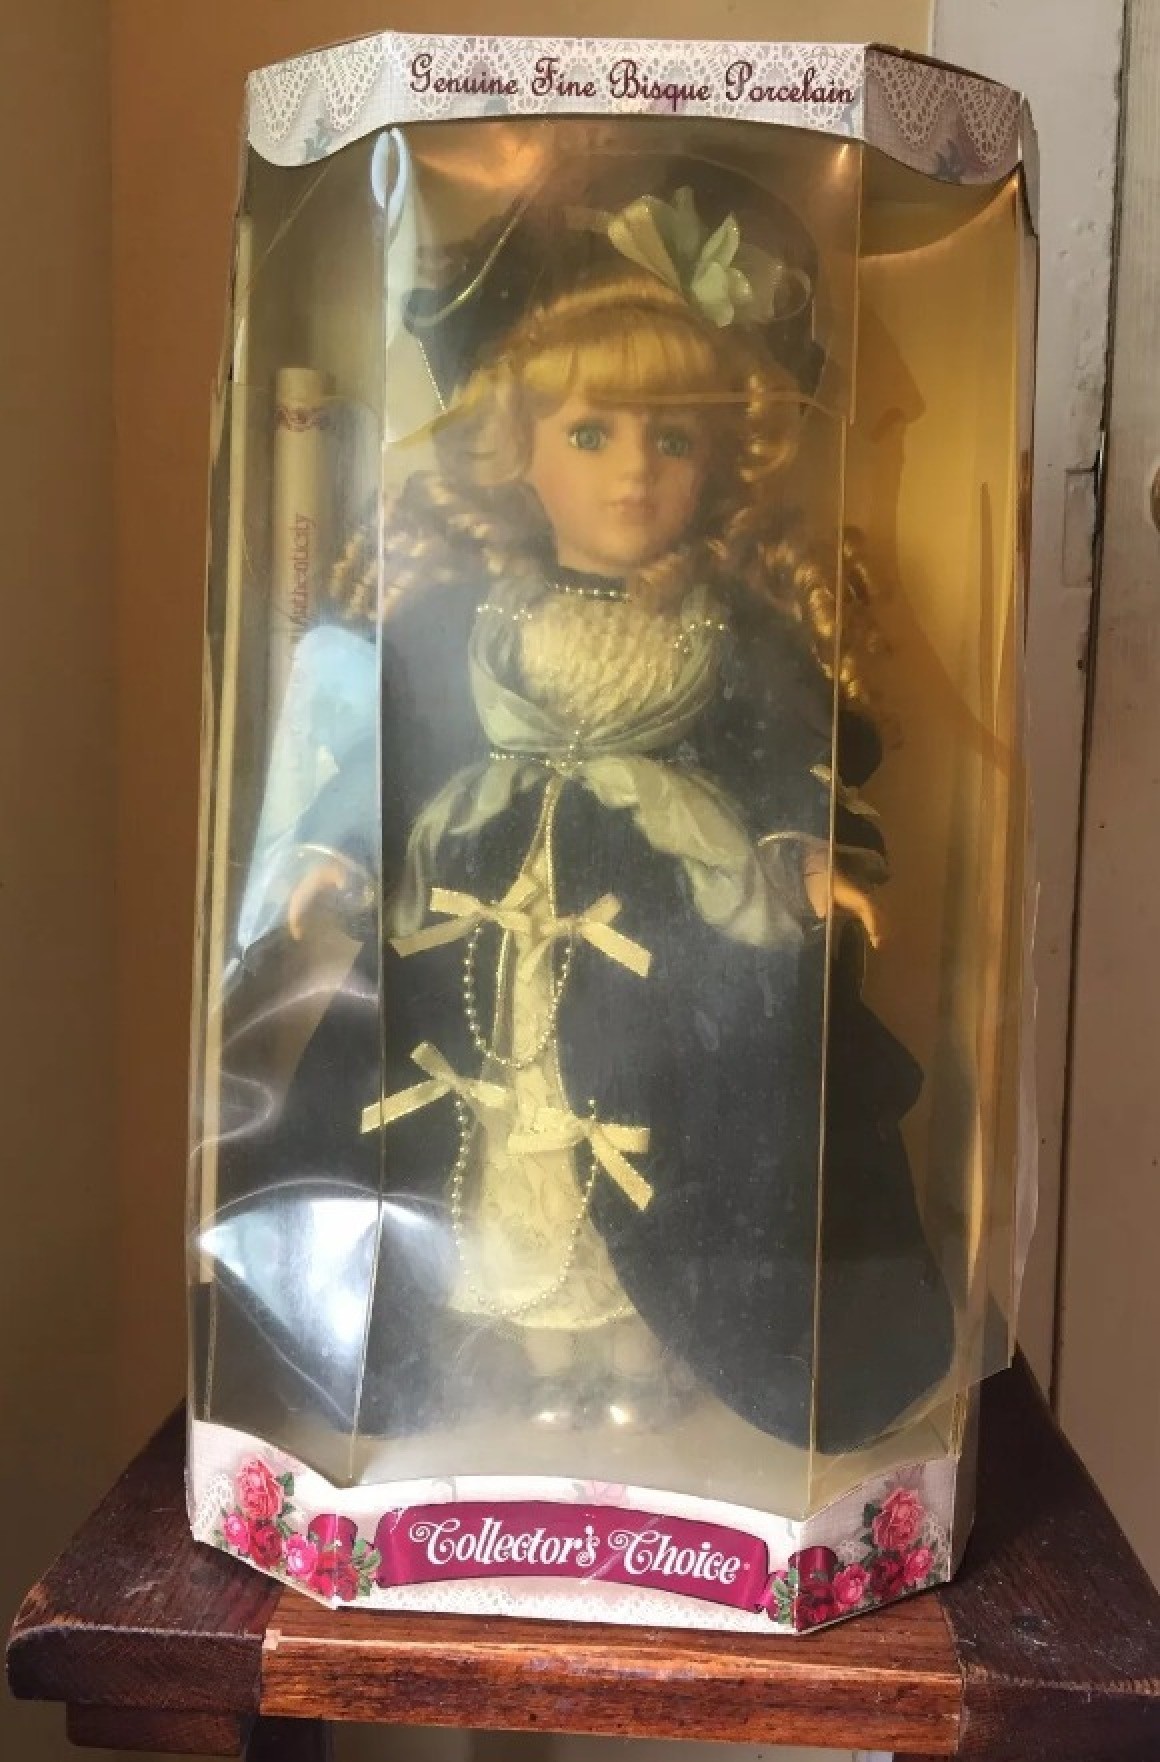 Collectors Choice Genuine Fine Bisque Porcelain Limited Edition Doll for sale online 